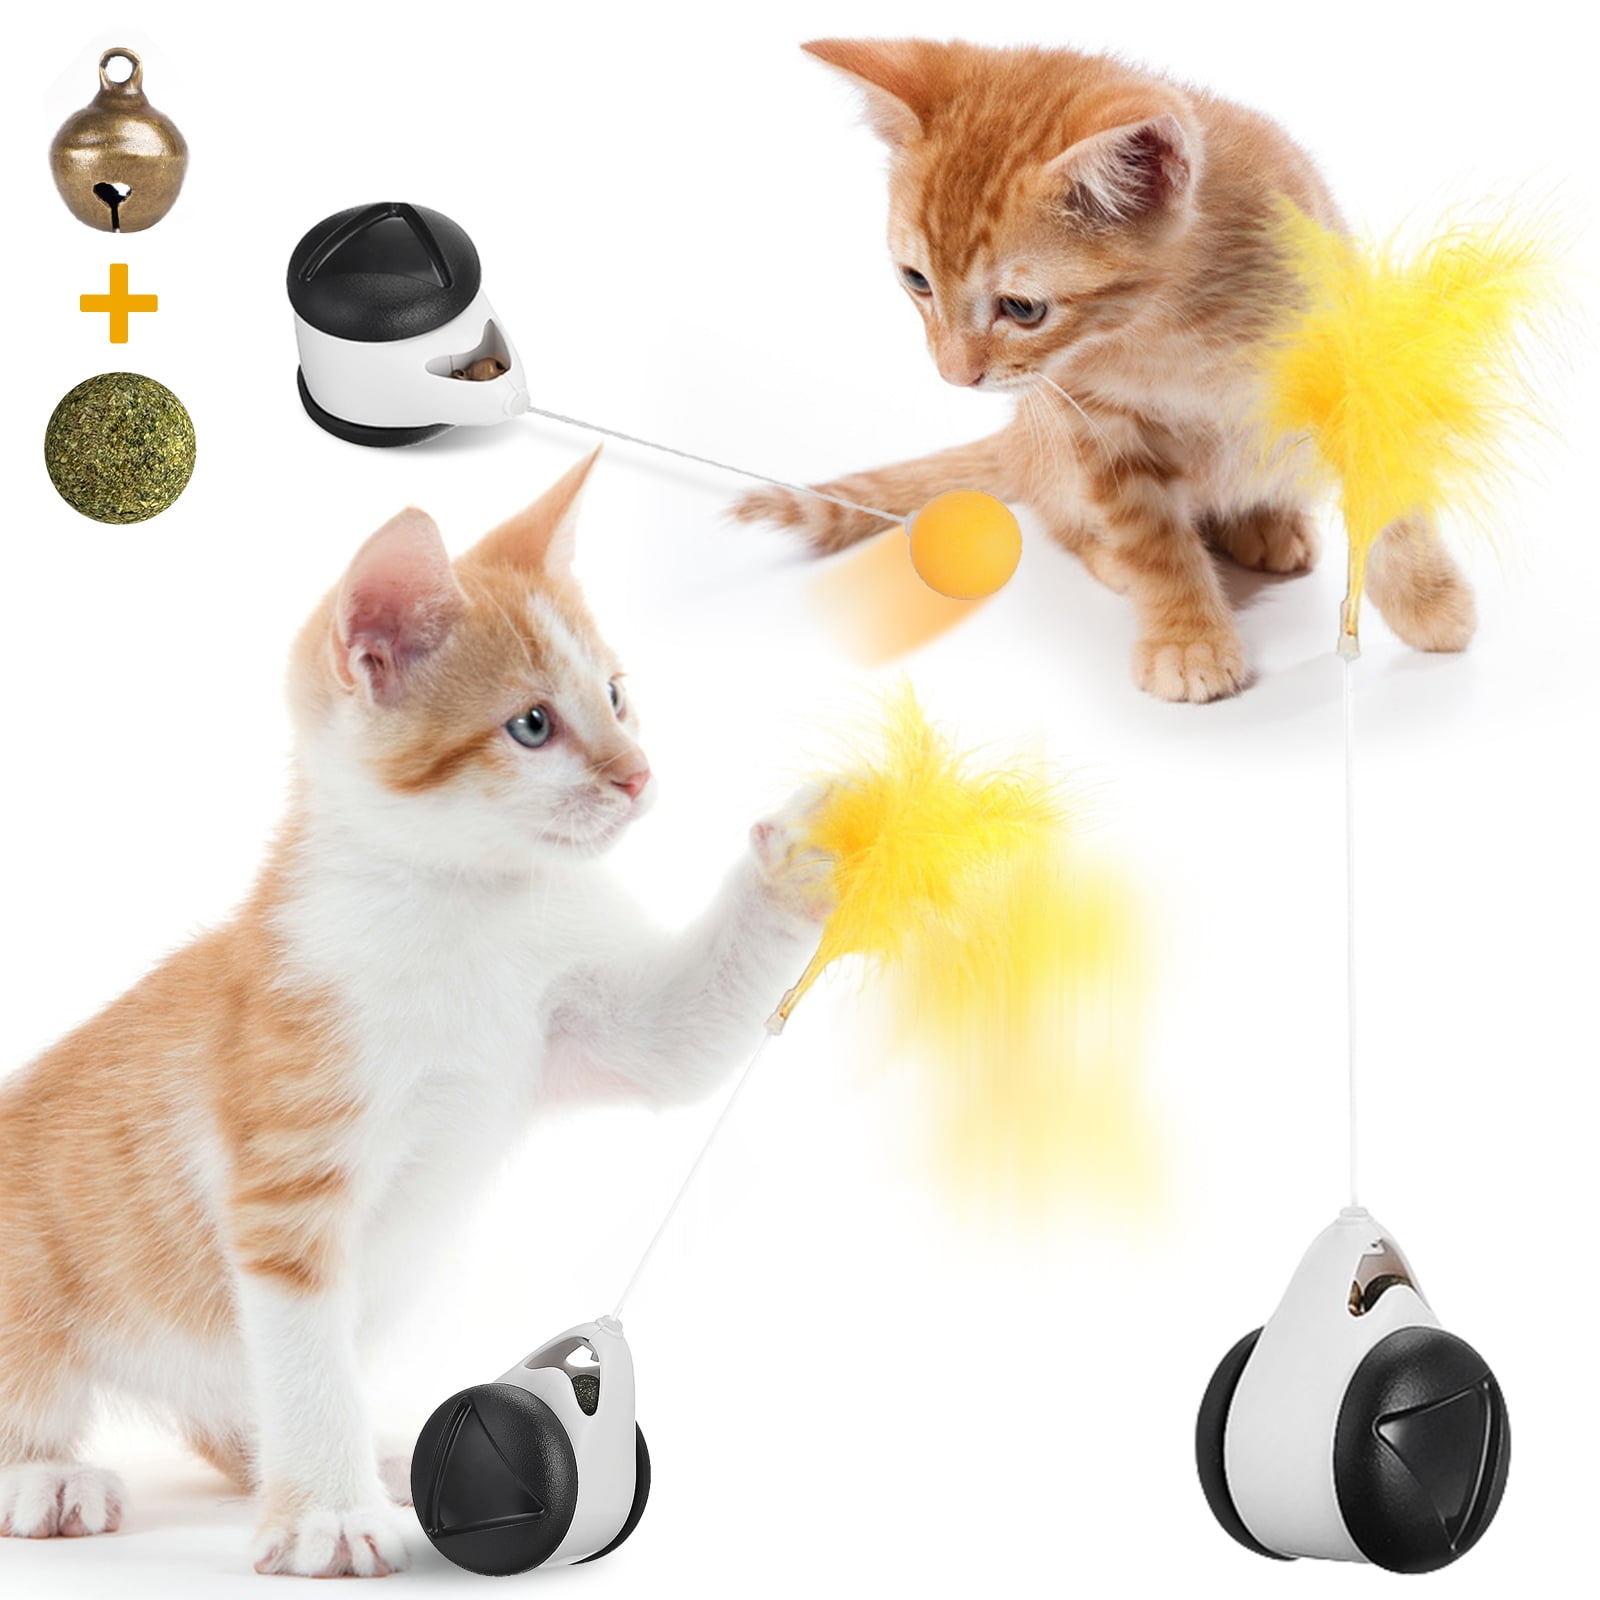 Focuspet Automatic Ball Cat Toy With Feathe Interactive Intelligent